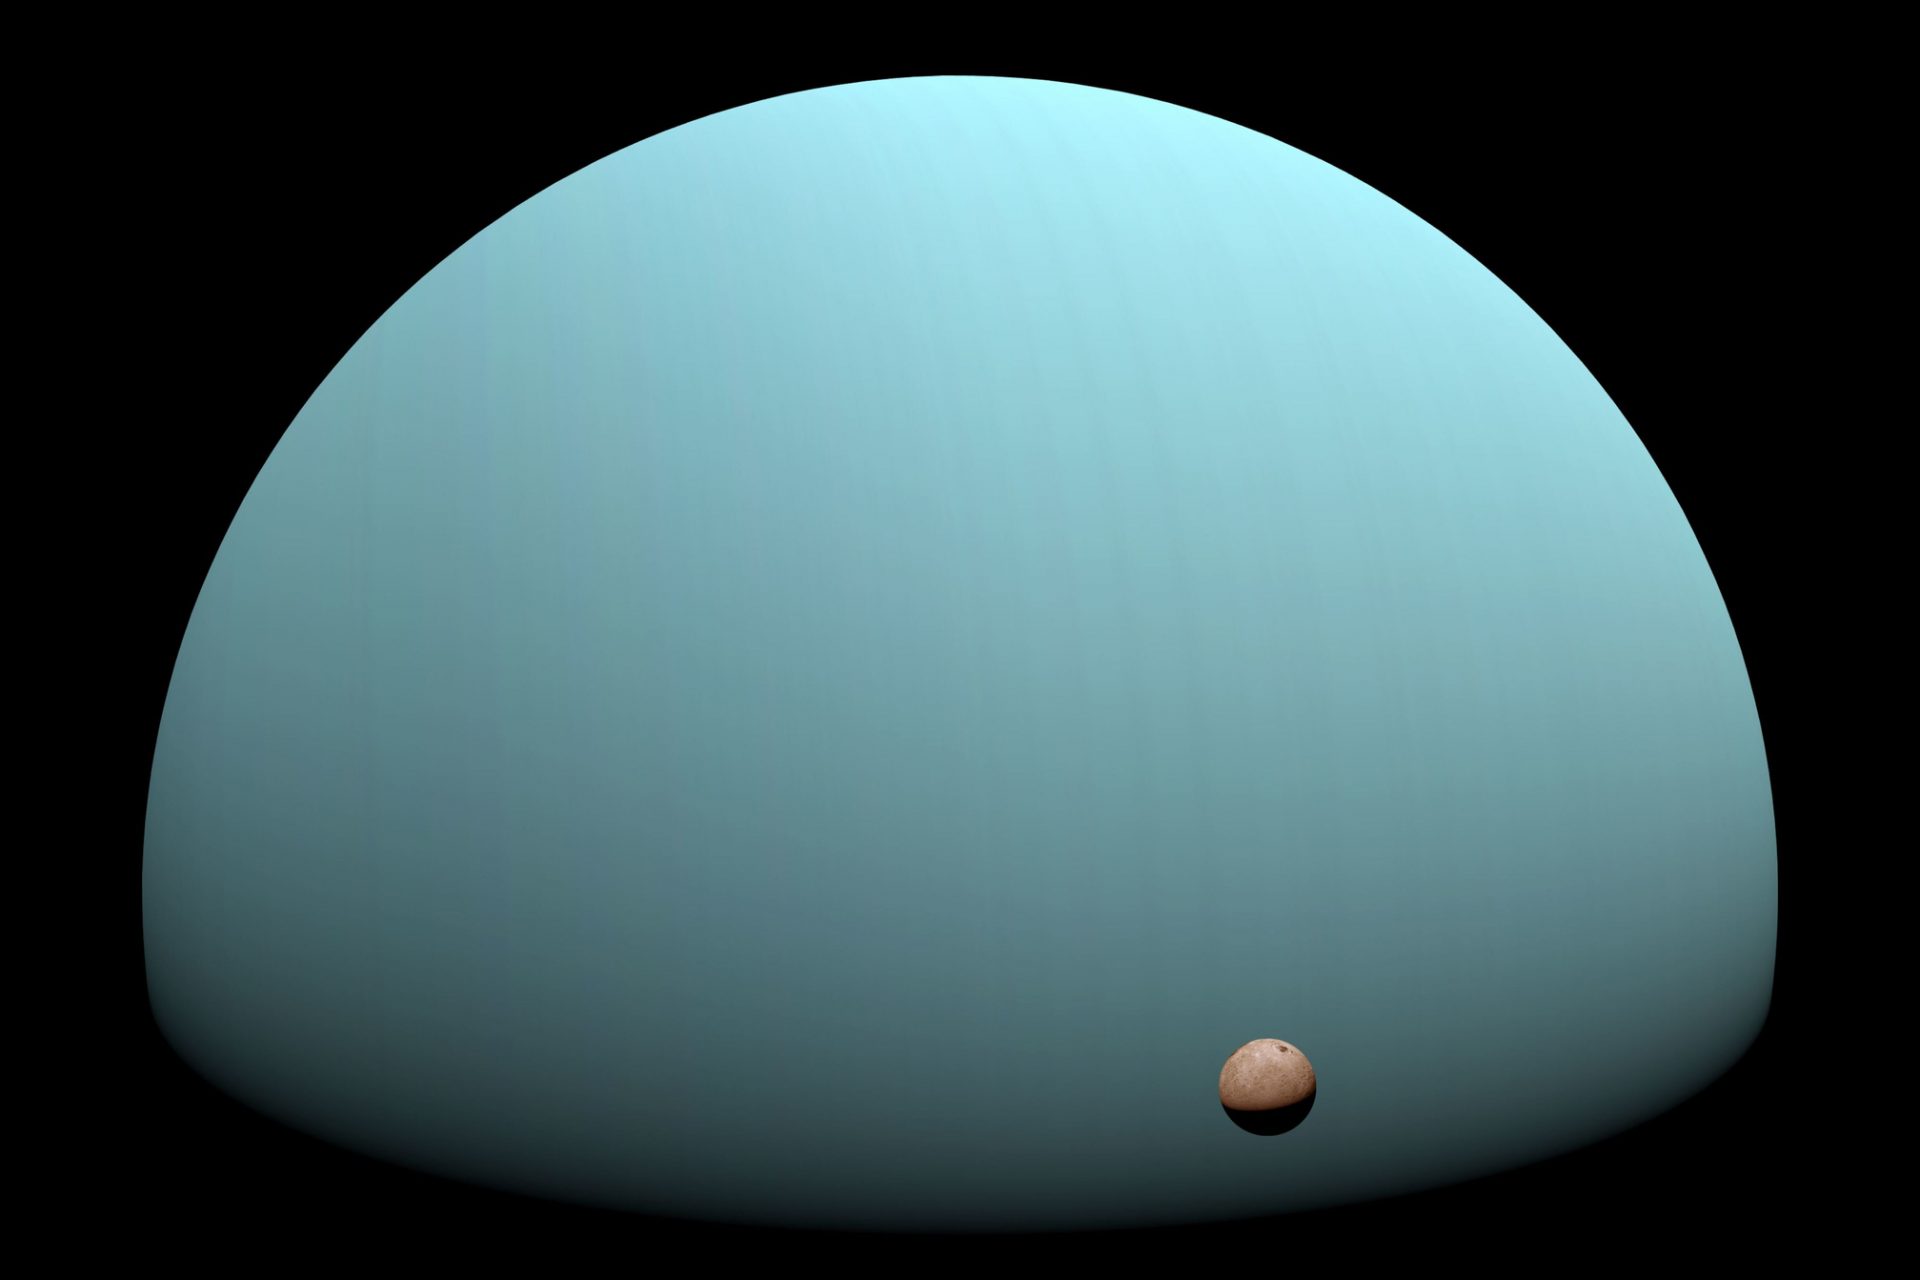 New images of Uranus are changing what we thought we knew about the planet